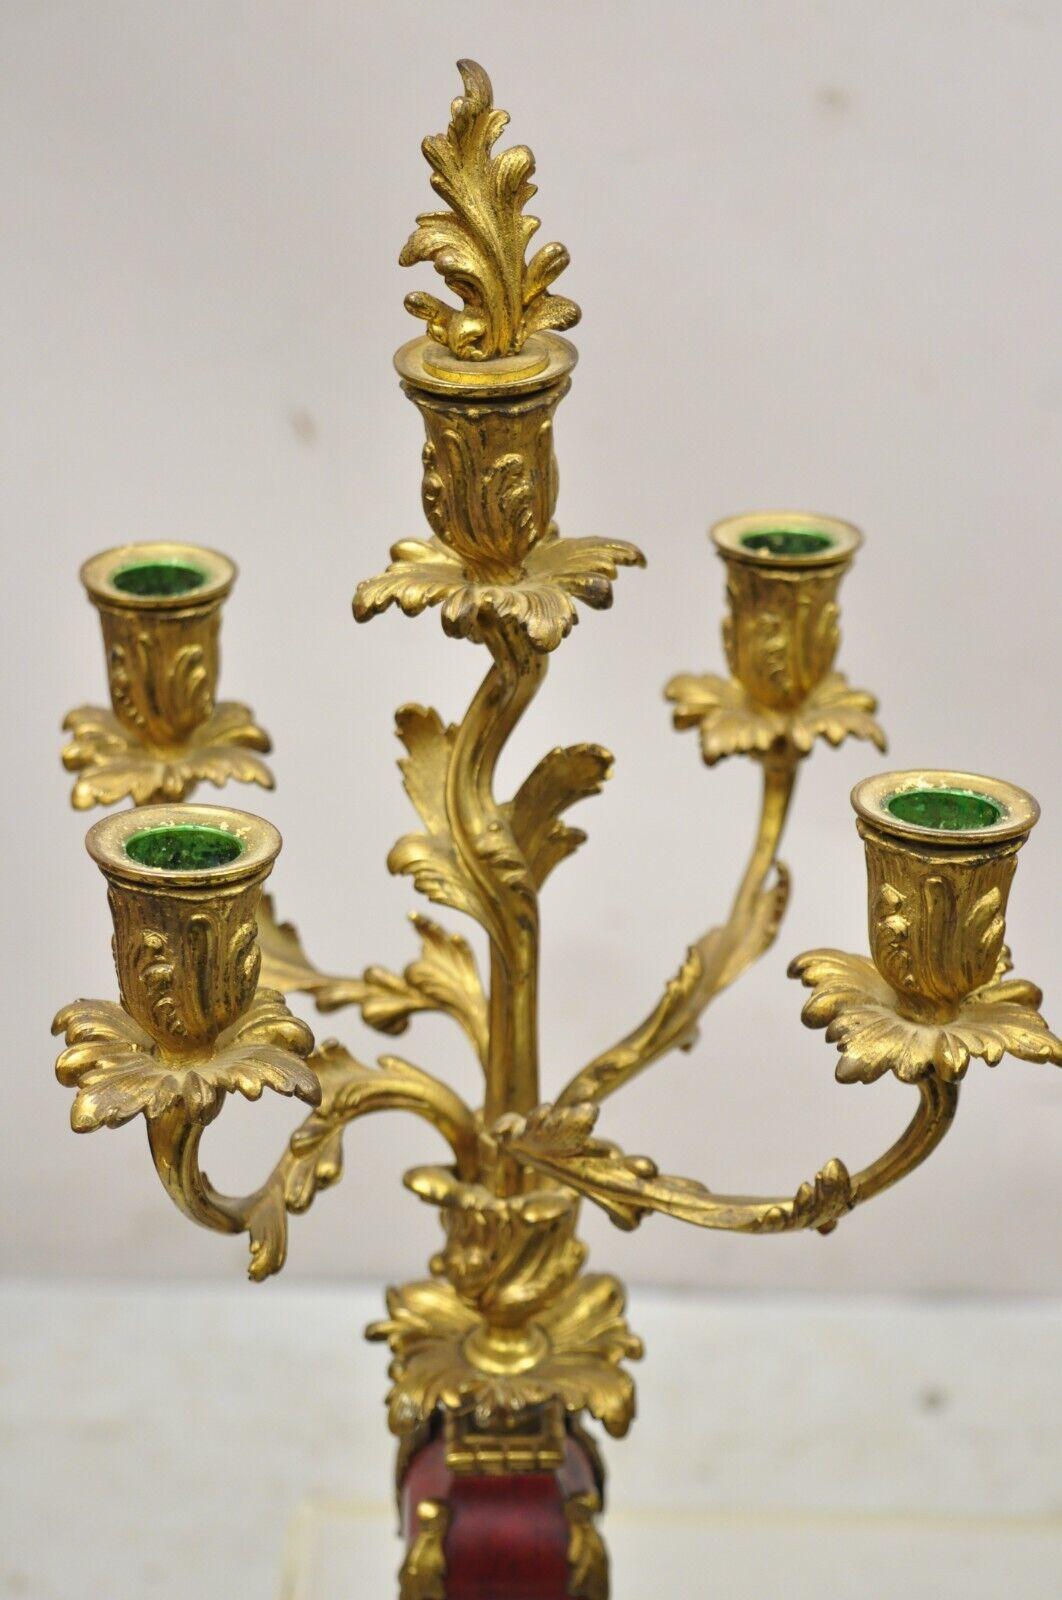 Antique French Louis XV Rococo Style Gold Gilt Bronze Candelabras, a Pair For Sale 7